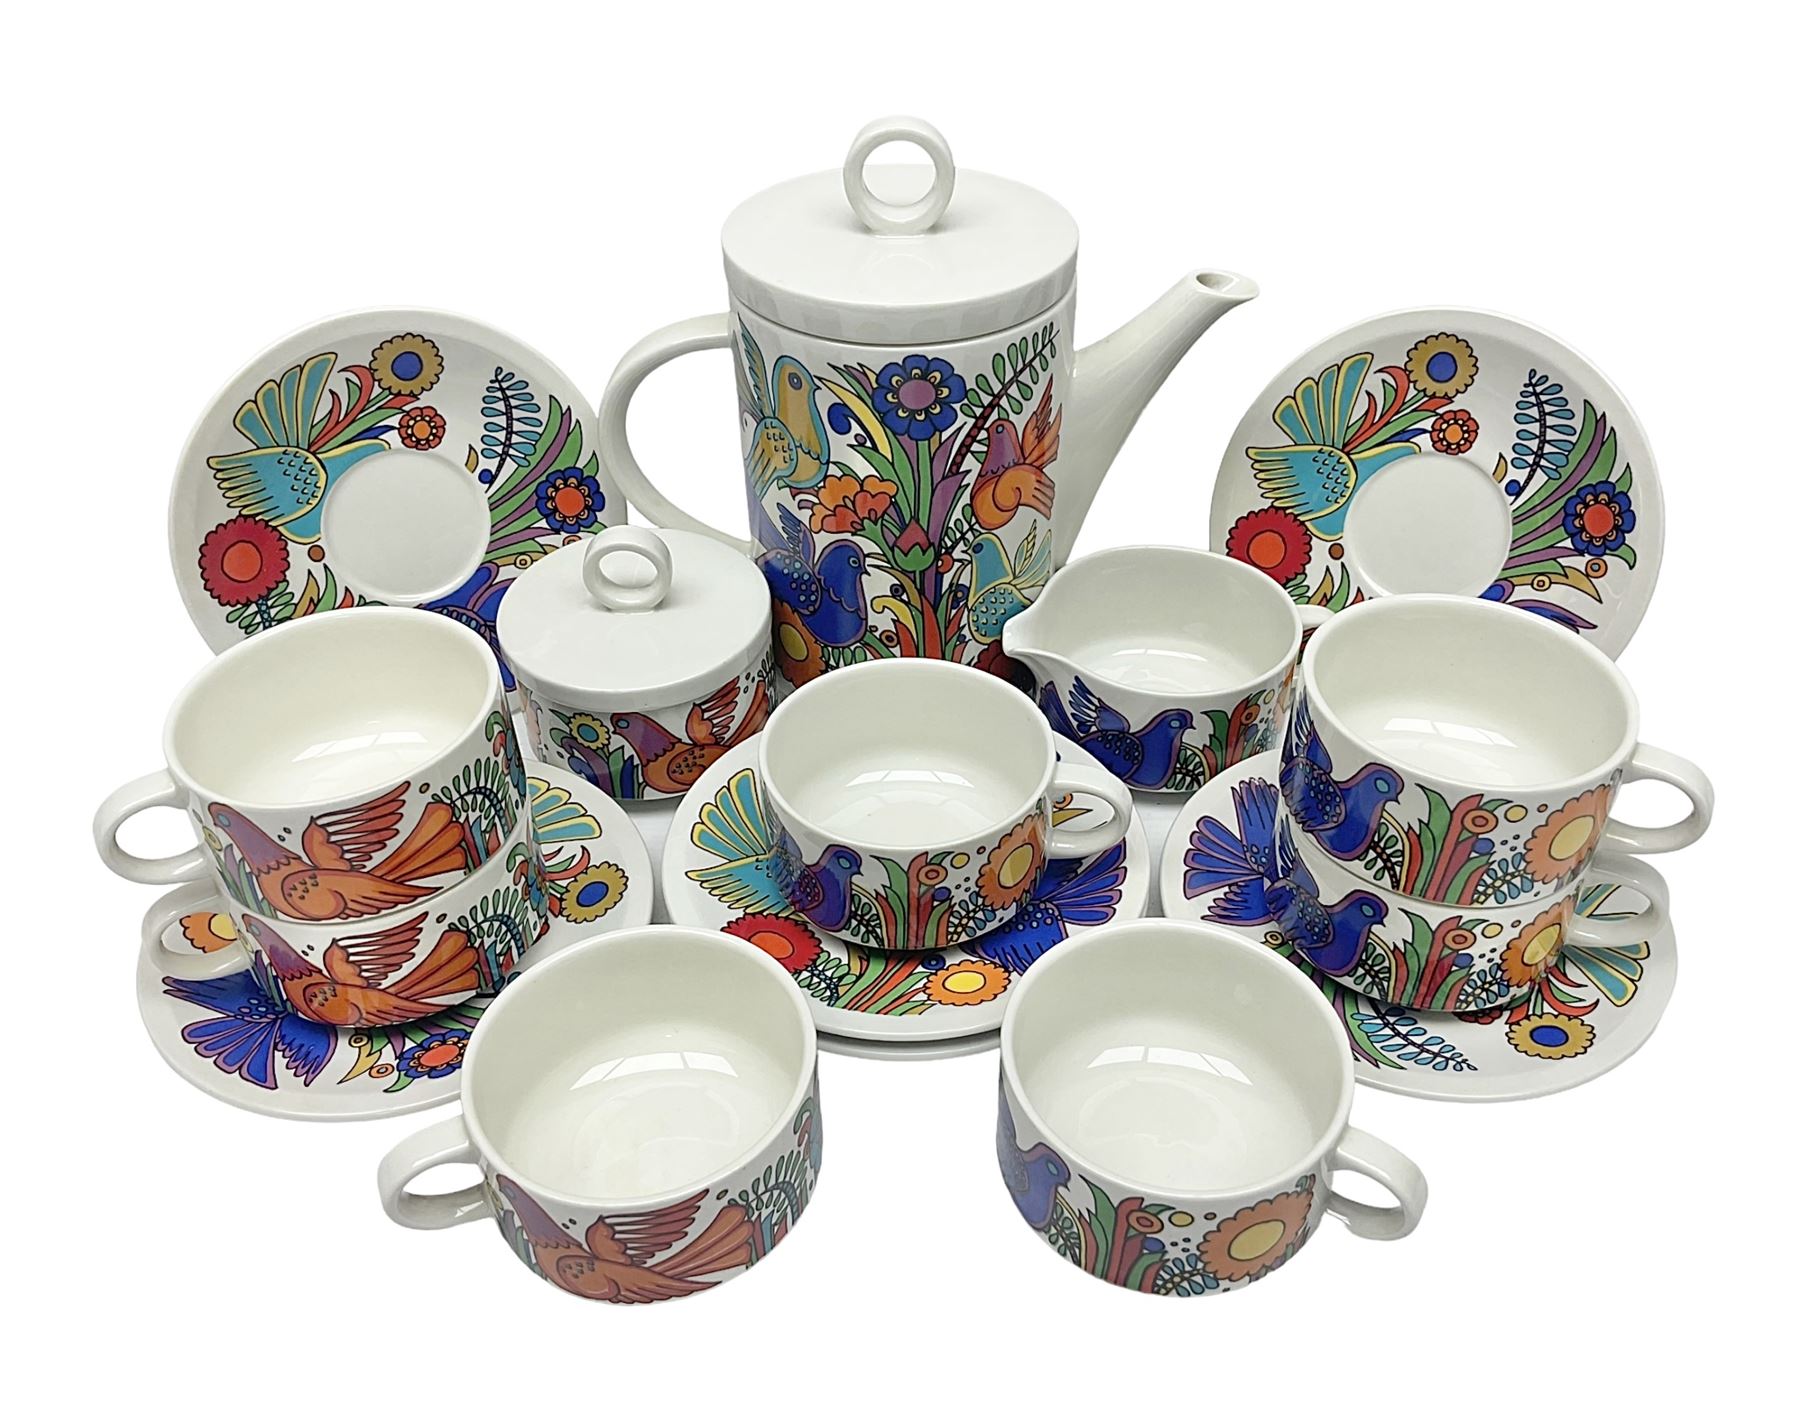 Villeroy & Boch Acapulco pattern coffee set for six